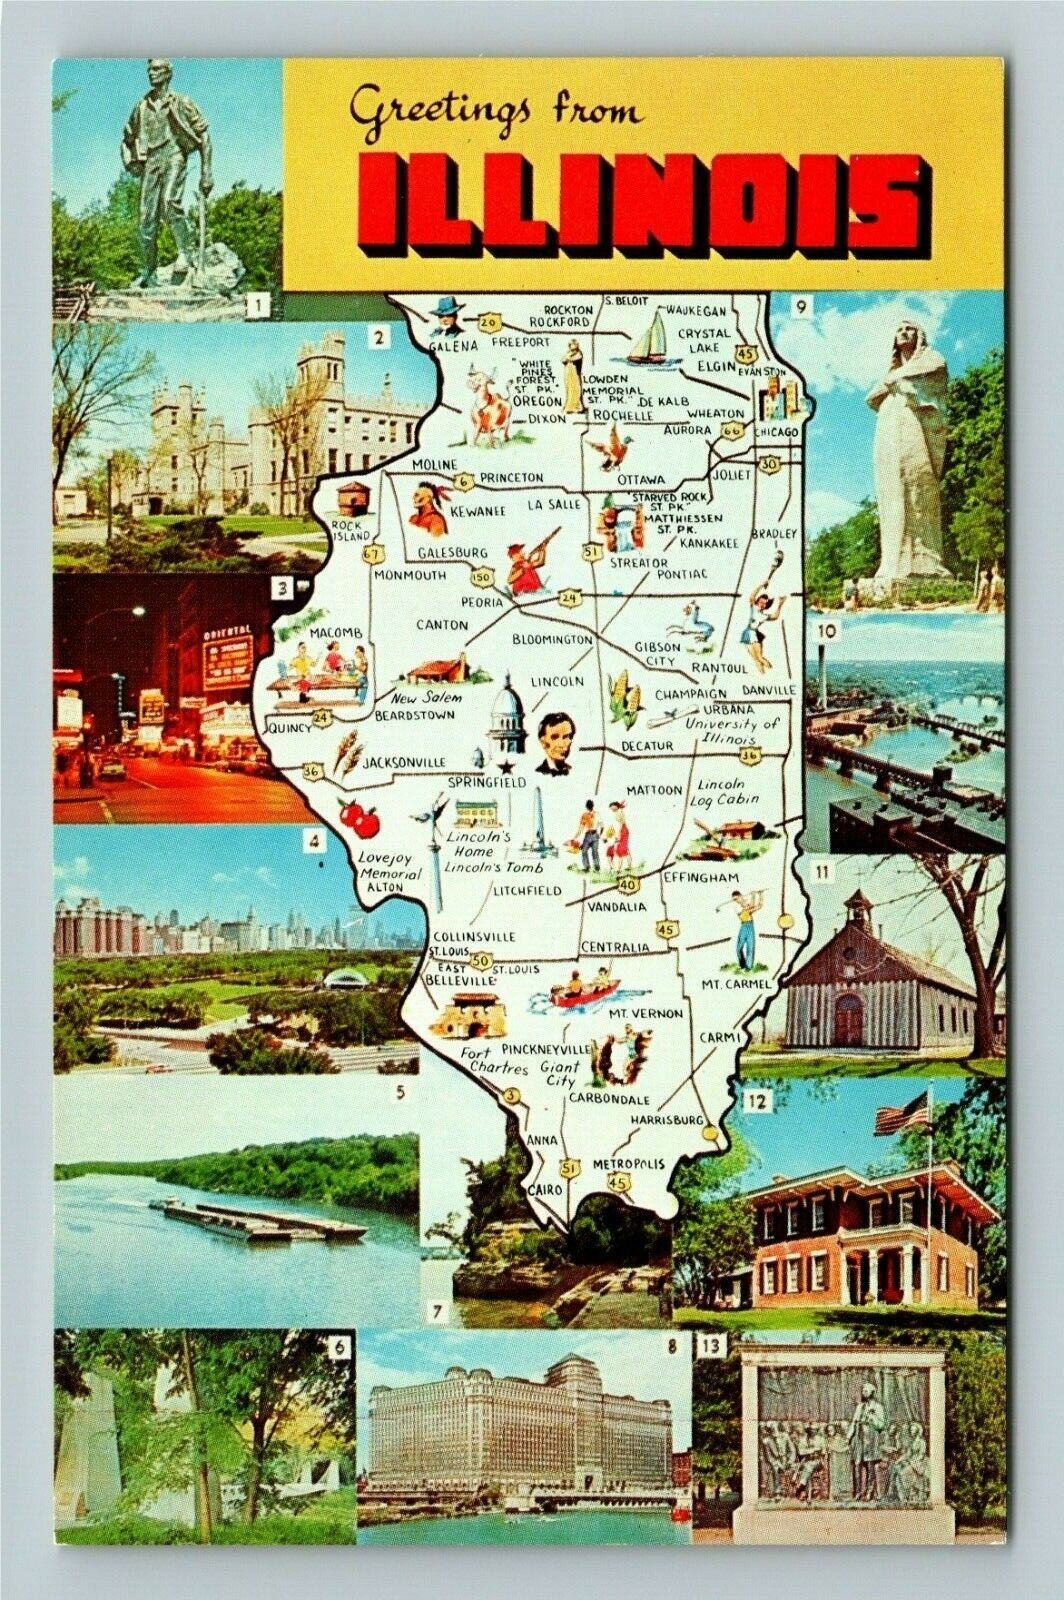 IL-Illinois, General Greetings, State Road Map, Tourist Spots, Vintage Postcard